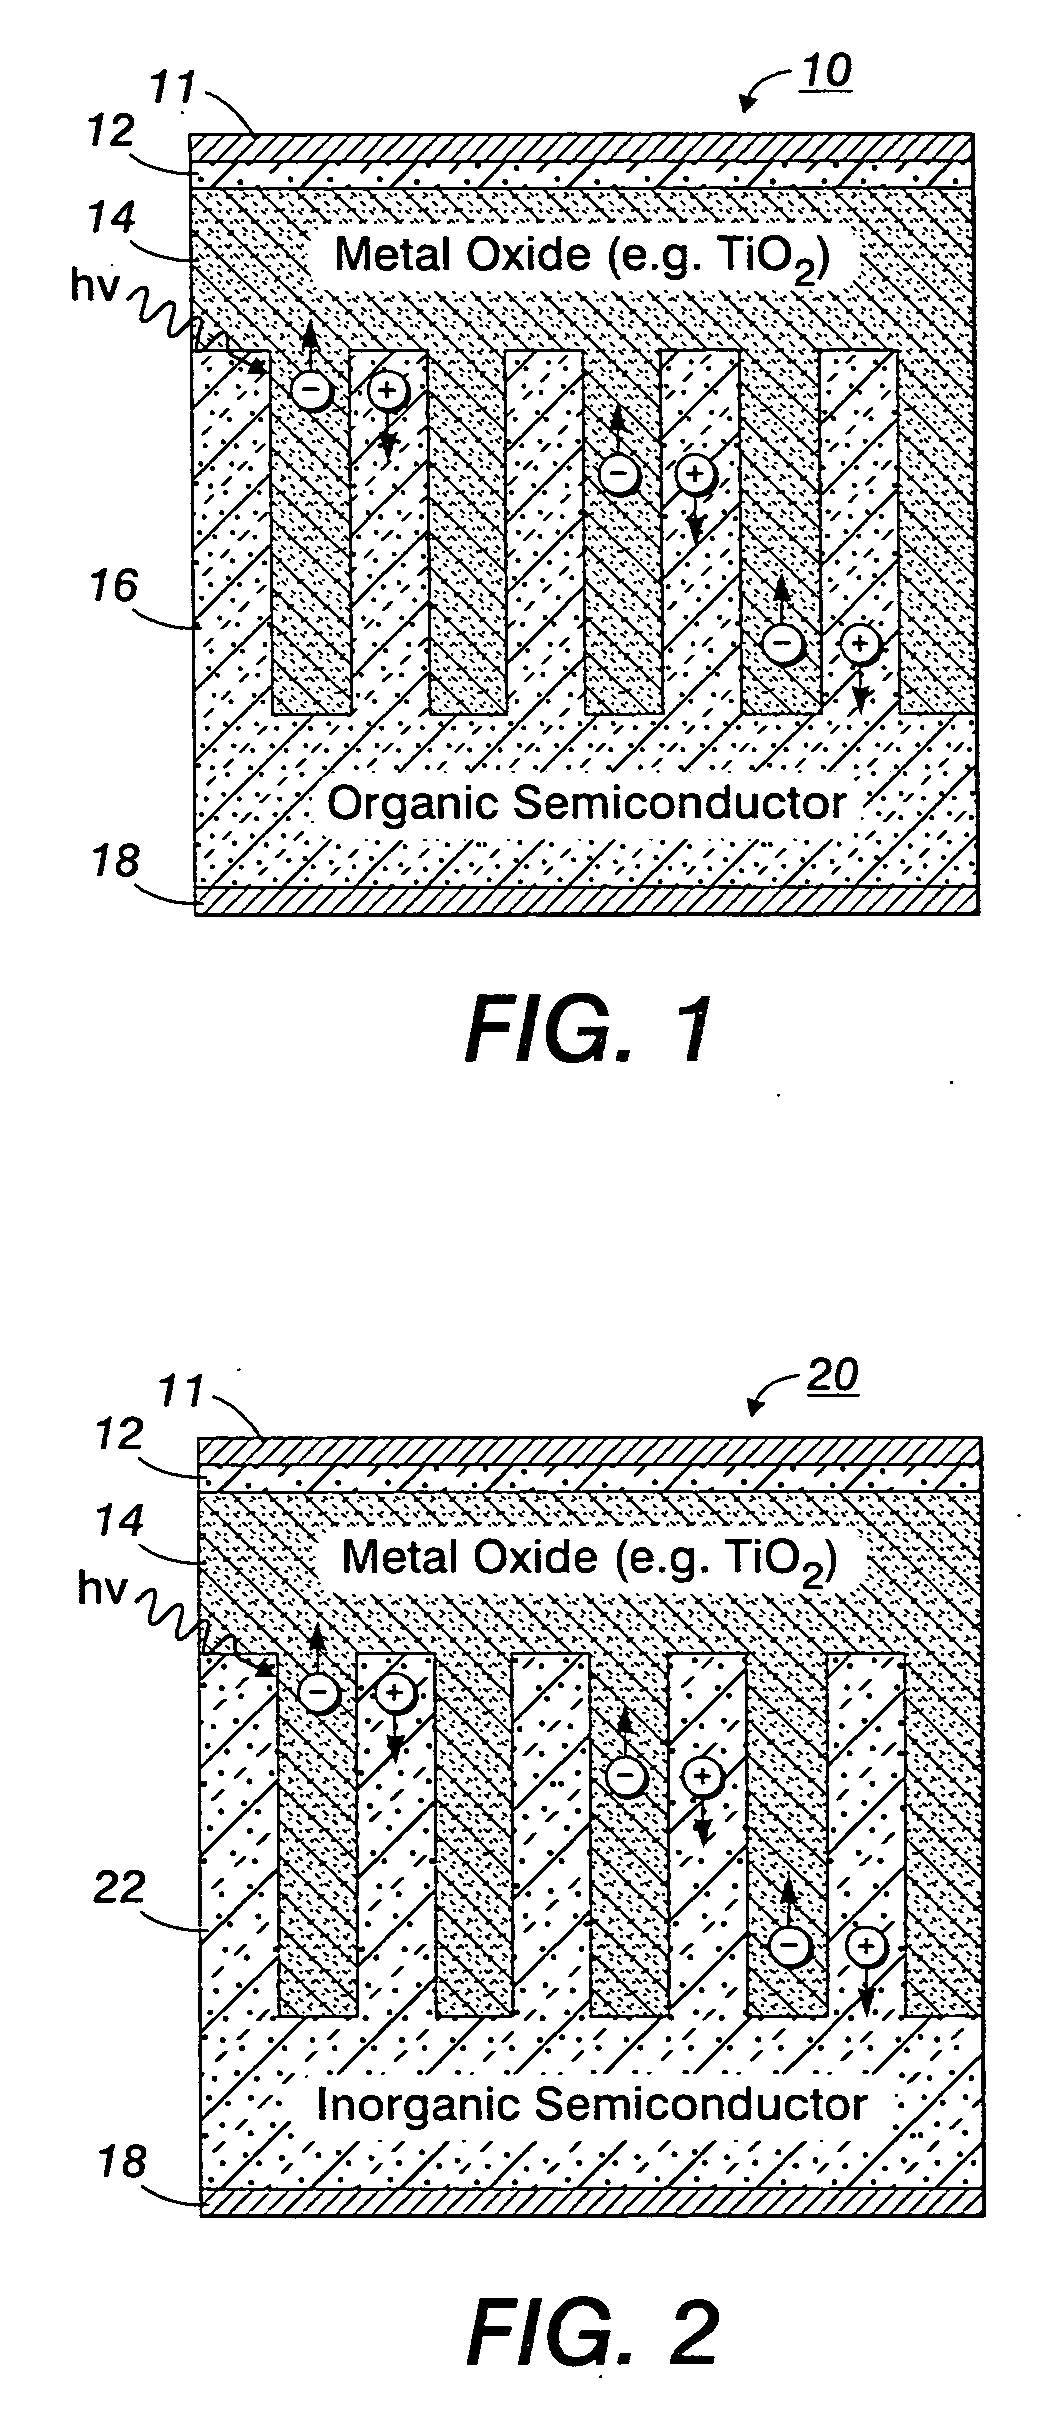 Nanostructured composite photovoltaic cell